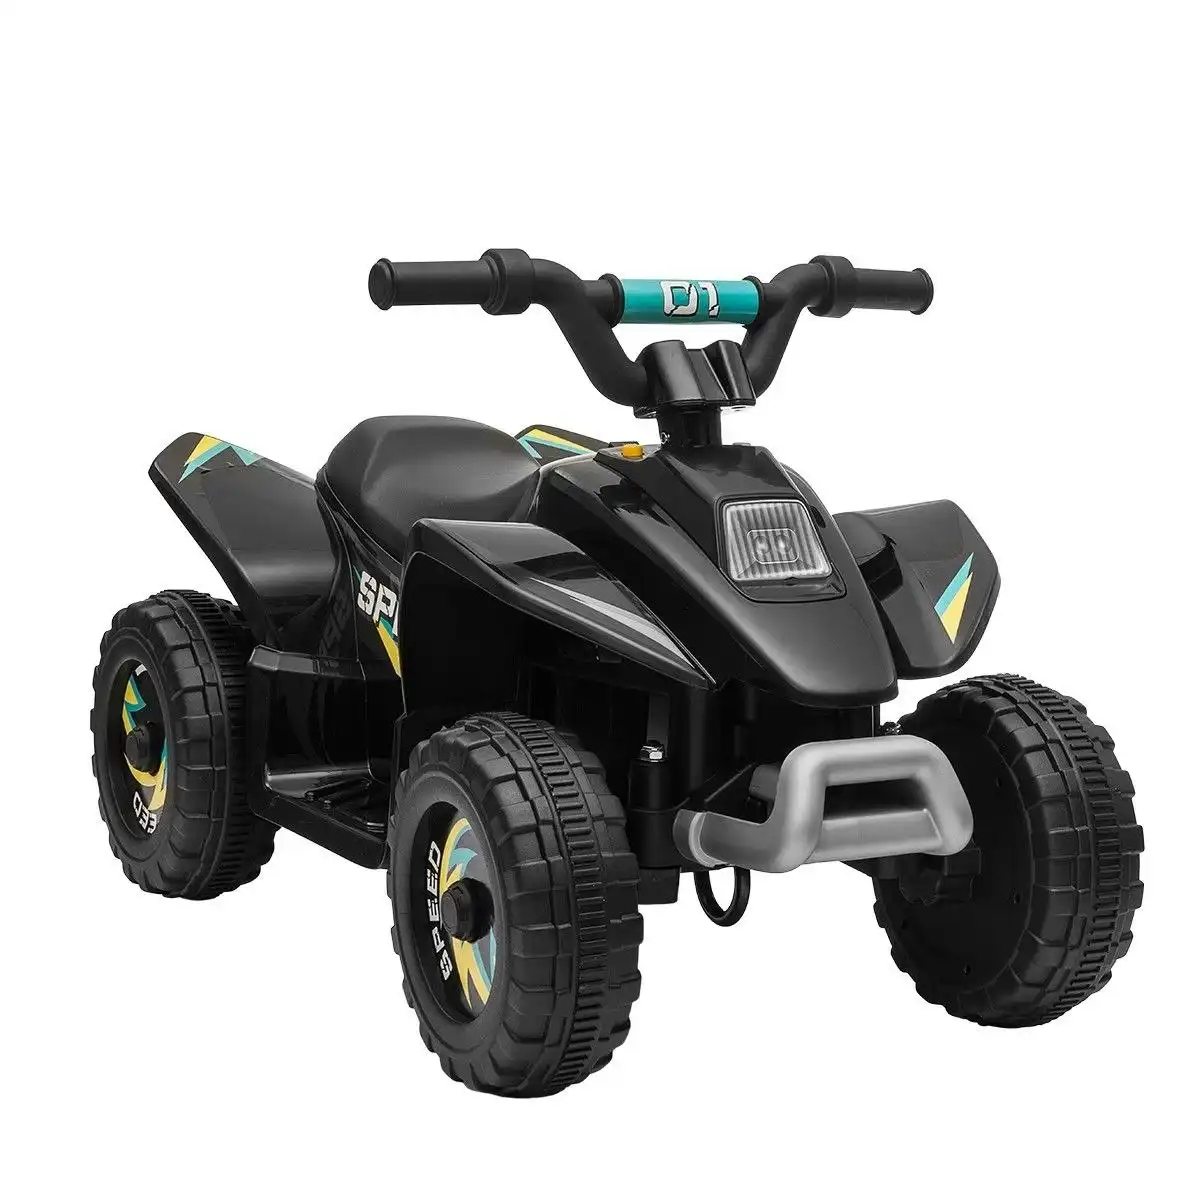 Ausway Kids Ride On Toy 6V Electric ATV Quad Rechargeable Battery Black